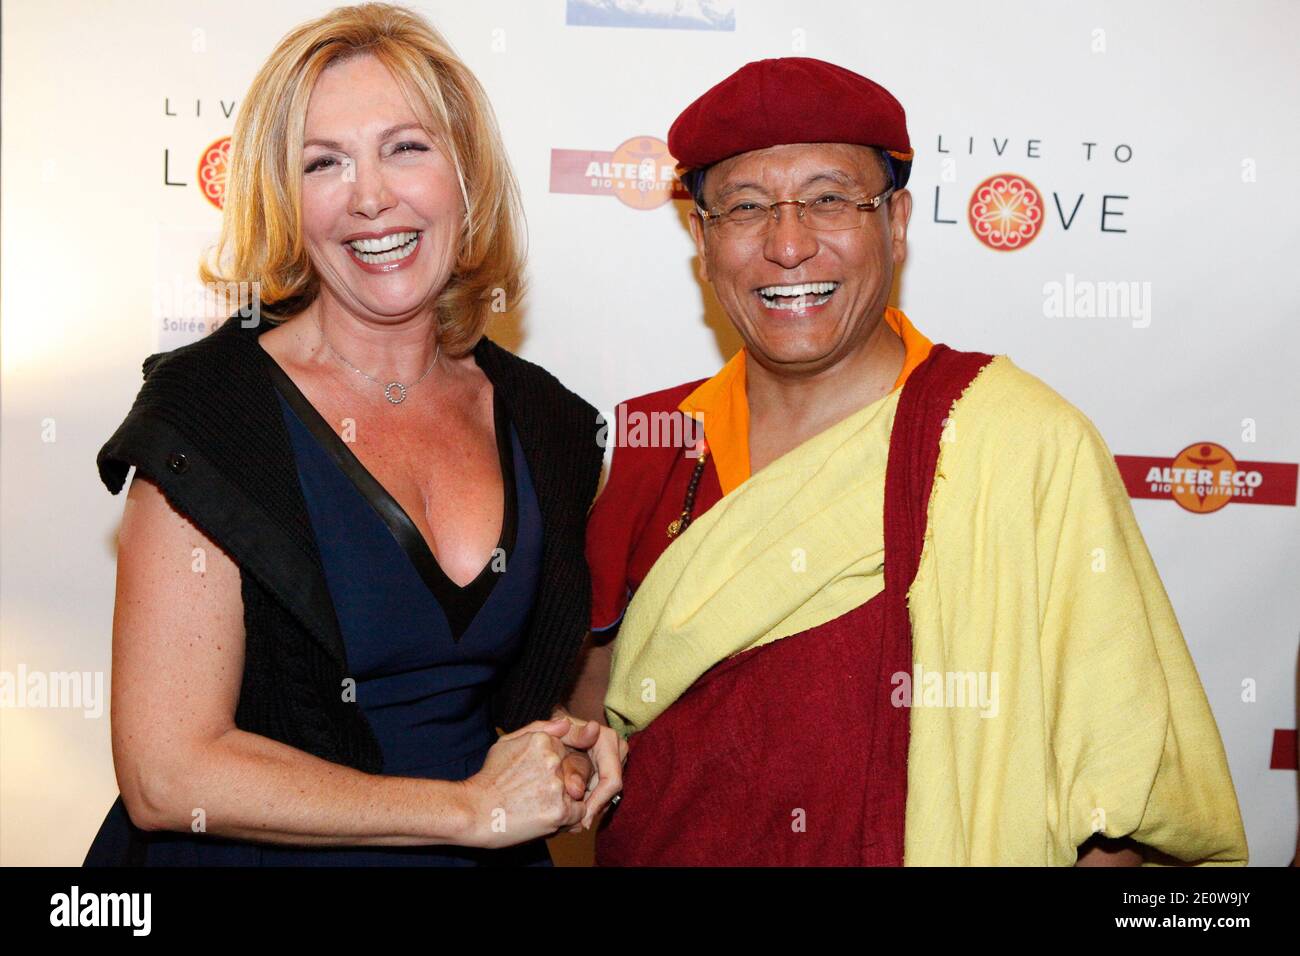 Fabienne Amiach and The Gyalwang Drukpa at the Gala of Charity "La Sagesse Au Feminim" by Drukpa Humanitaire held at Hotel Lutetia, in Paris, France, on November 14, 2012. Photo by Audrey Poree/ABACAPRESS.COM Stock Photo